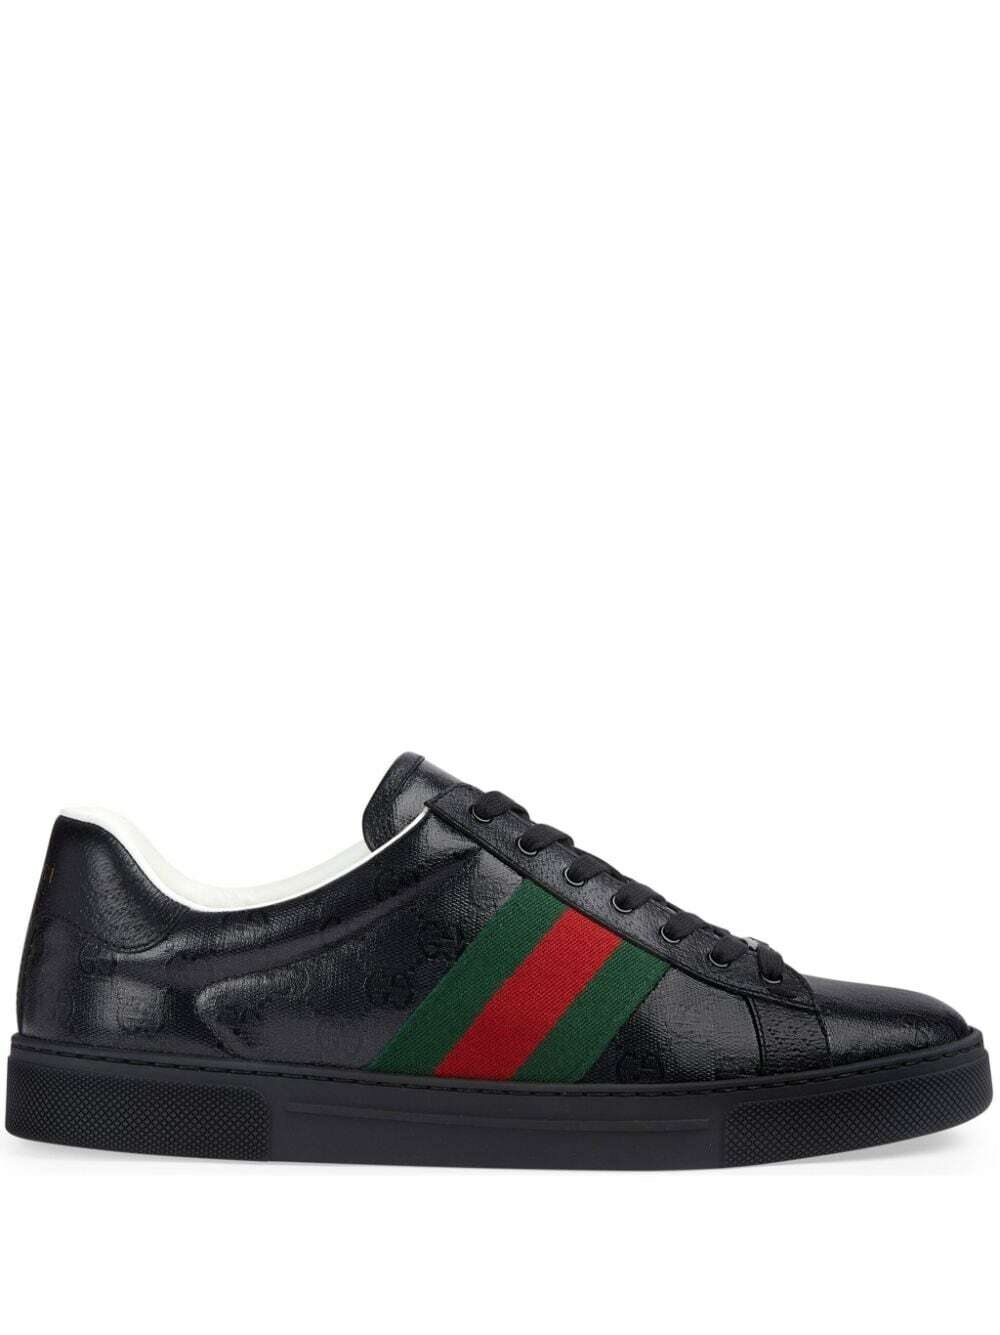 Photo: GUCCI - Ace Web Detail Sneakers